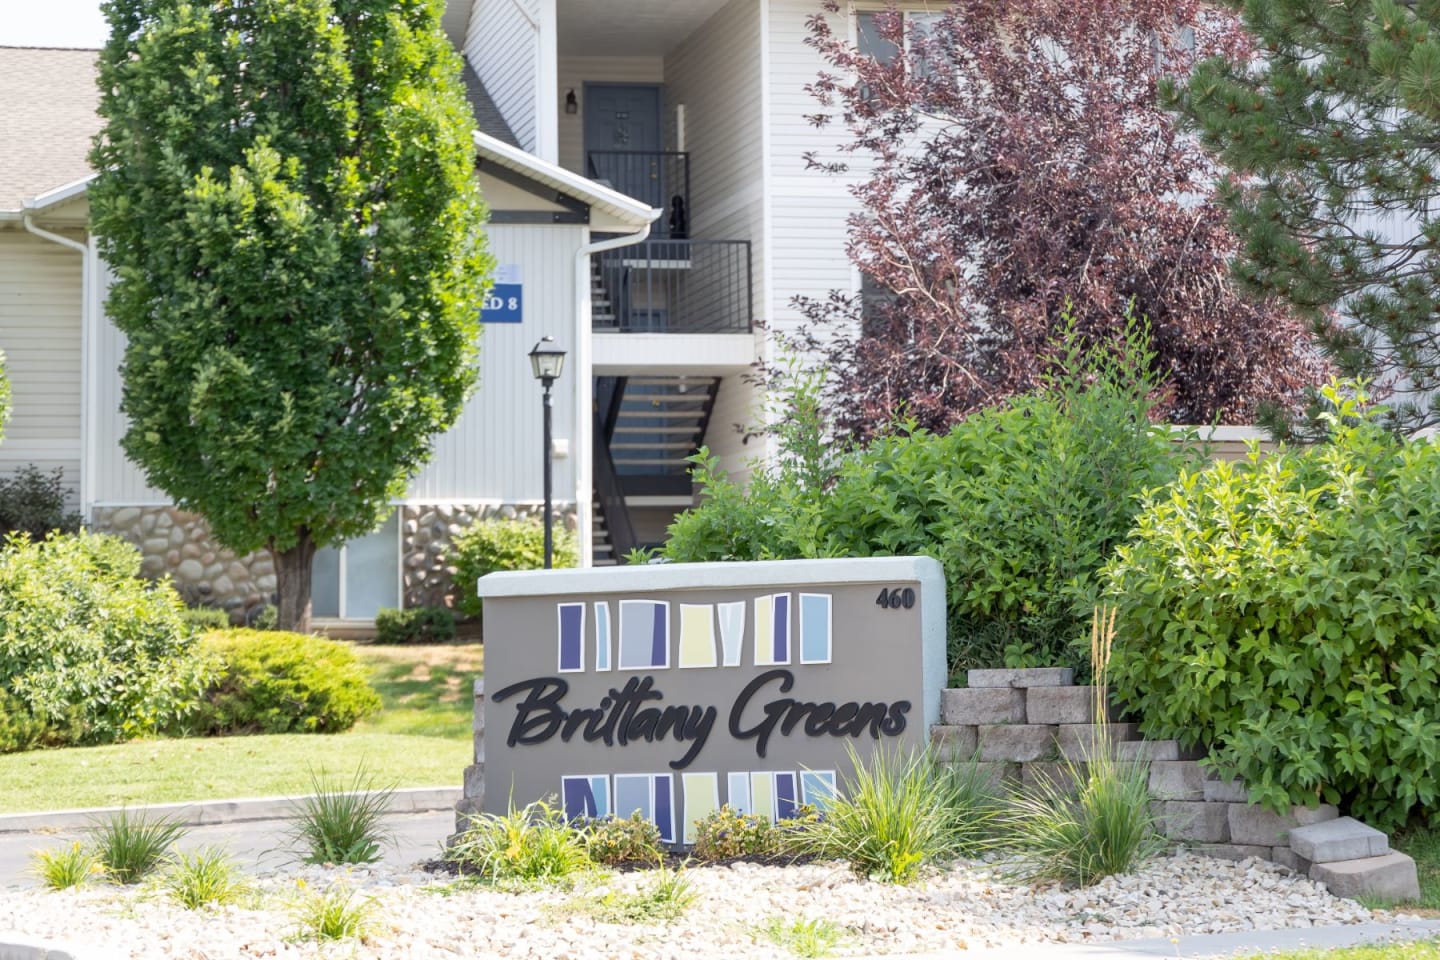 BRITTANY GREENS APARTMENTS Photo